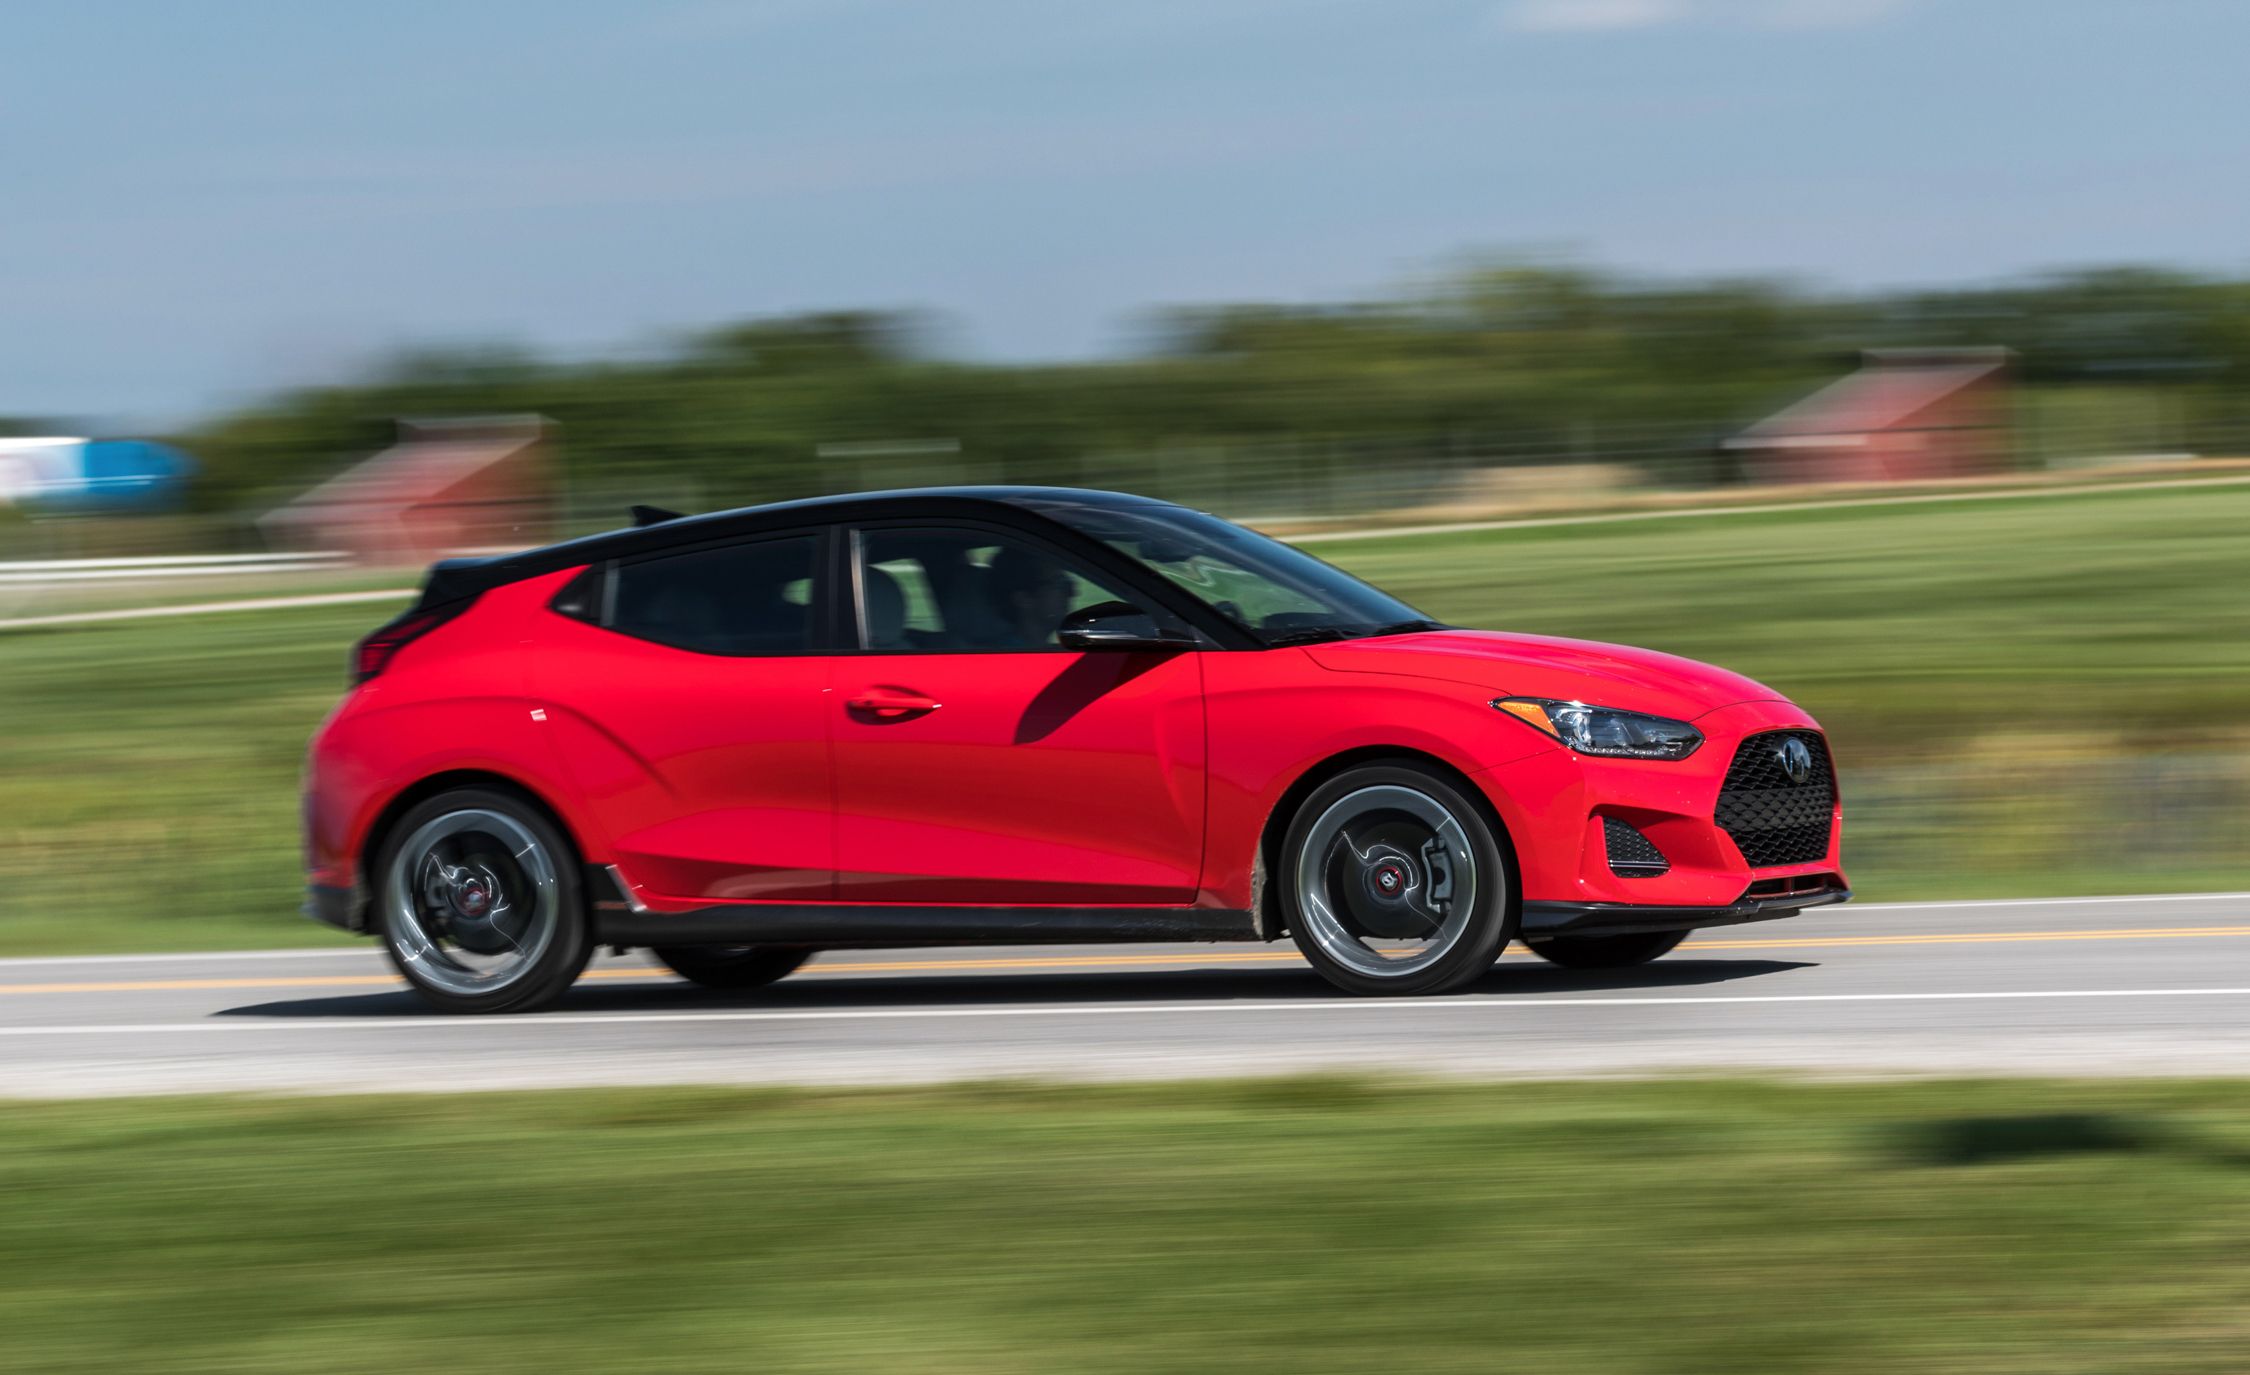 2019 Hyundai Veloster Turbo DCT Automatic Wants a Better Gearbox